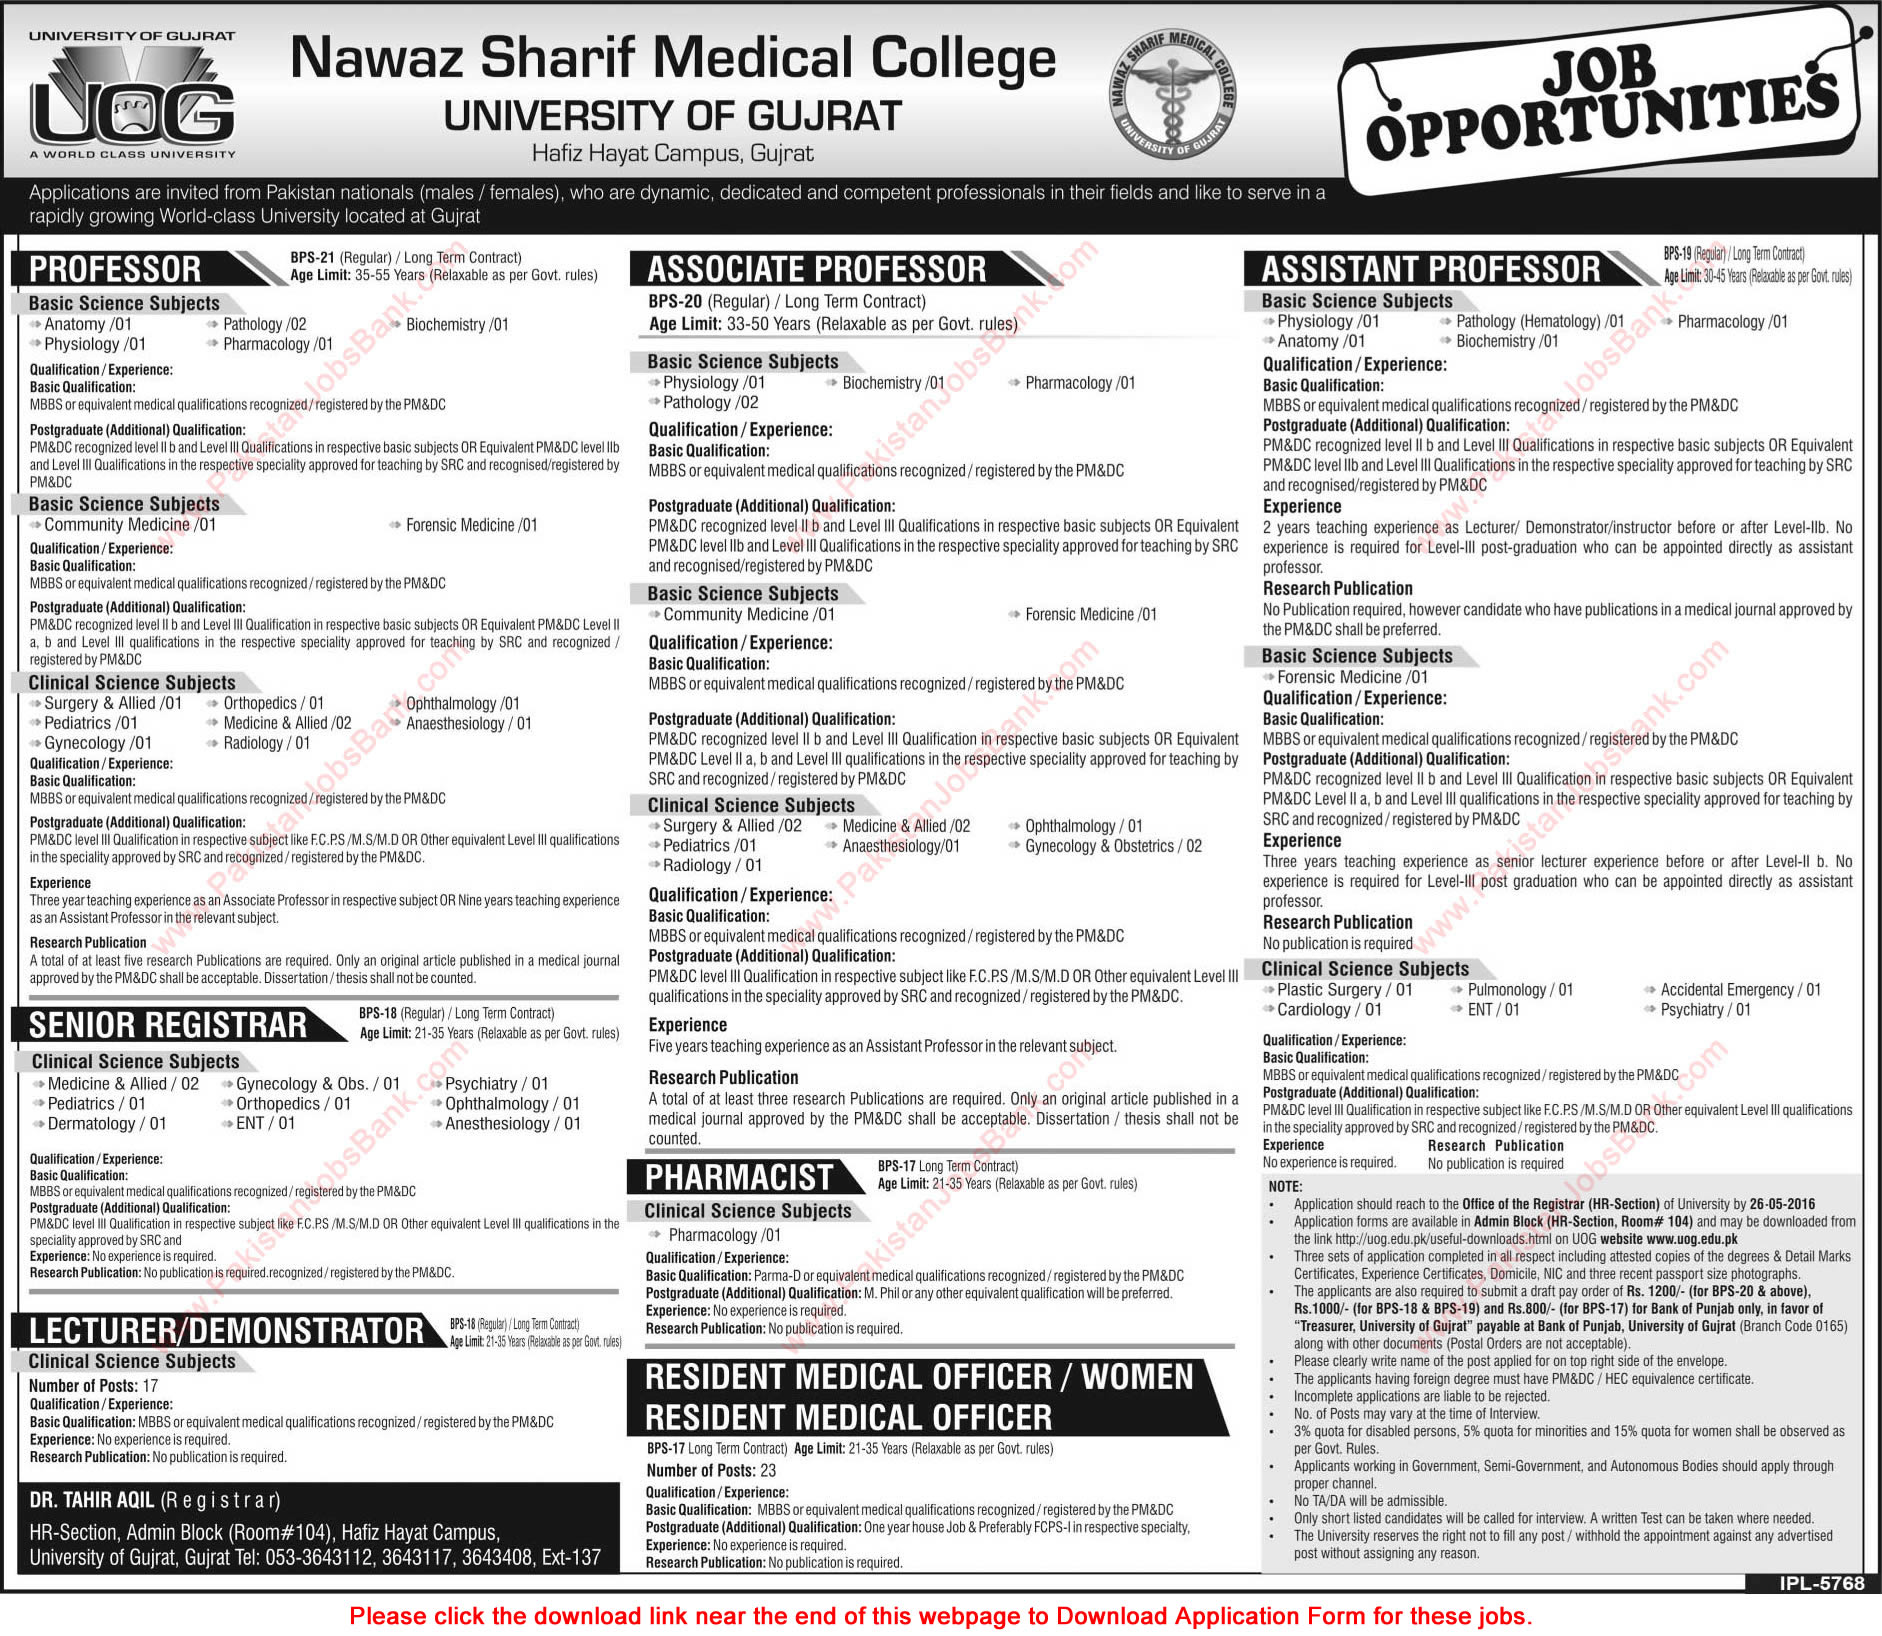 Nawaz Sharif Medical College University of Gujrat Jobs May 2016 UOG Application Form Teaching Faculty, Medical Officers & Pharmacist Latest